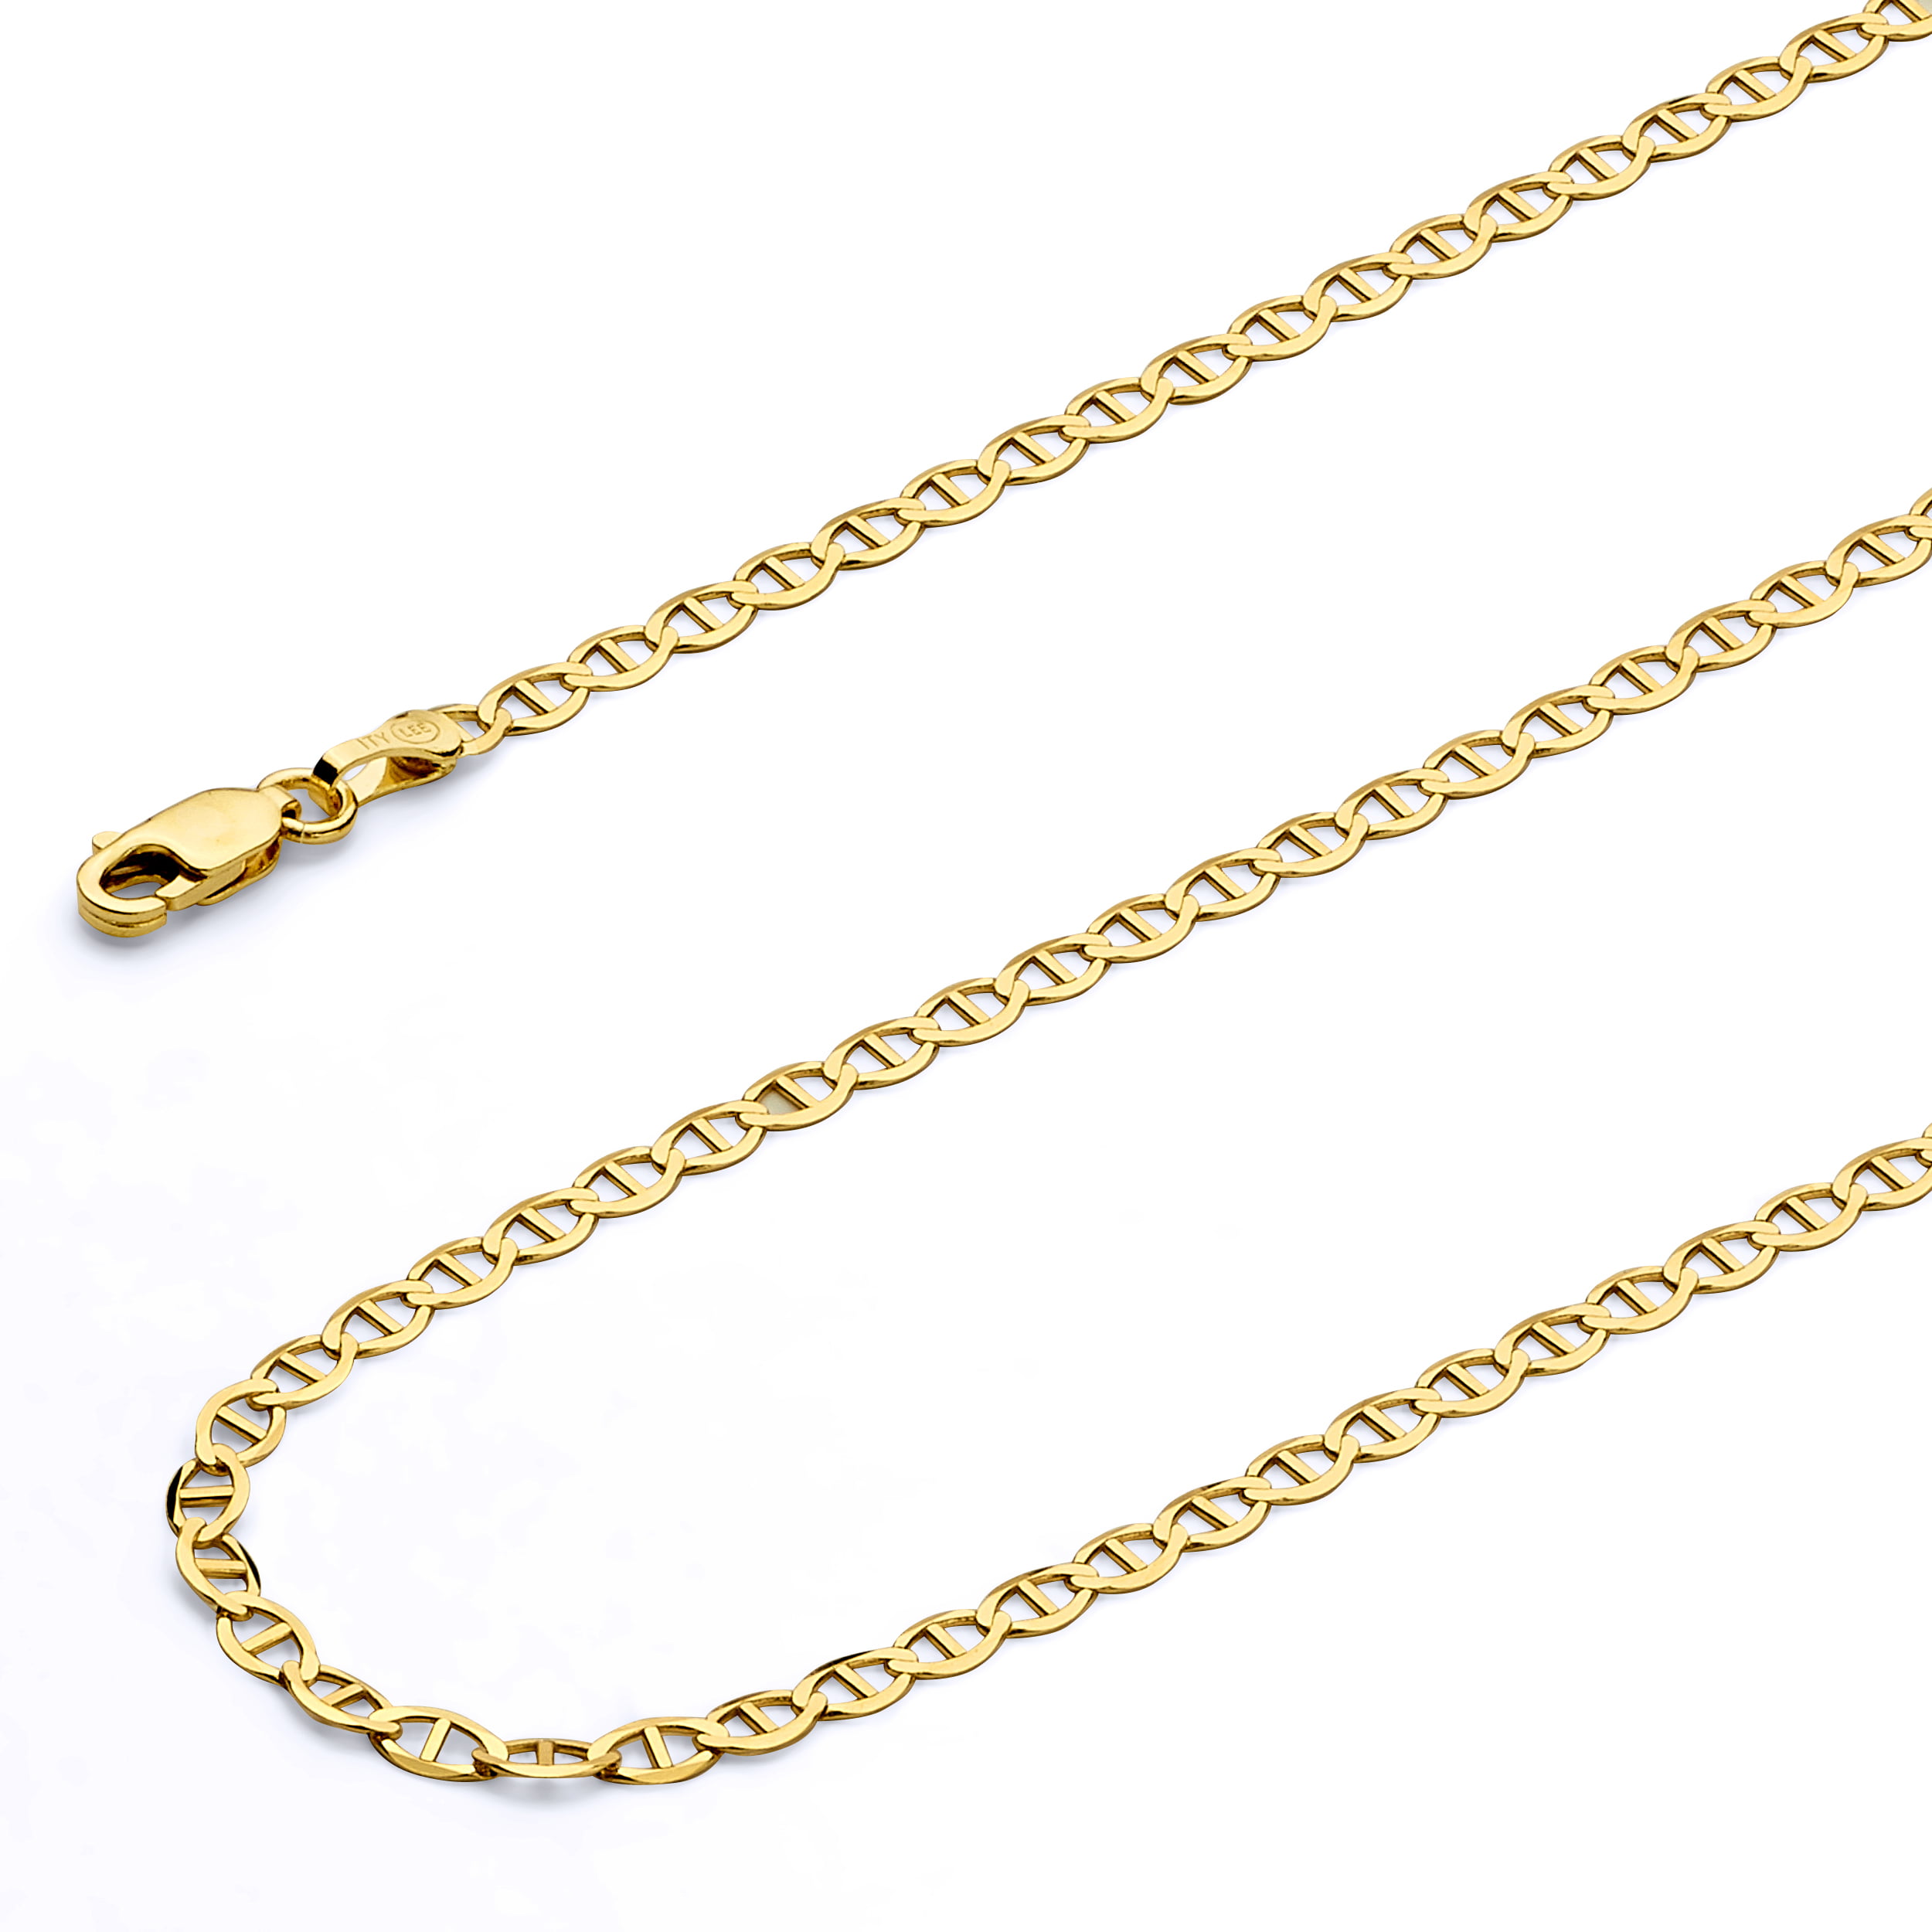 Wellingsale 14k Yellow Gold Polished 2.6mm Figaro 3+1 HOLLOW Chain Necklace with Lobster Claw Clasp